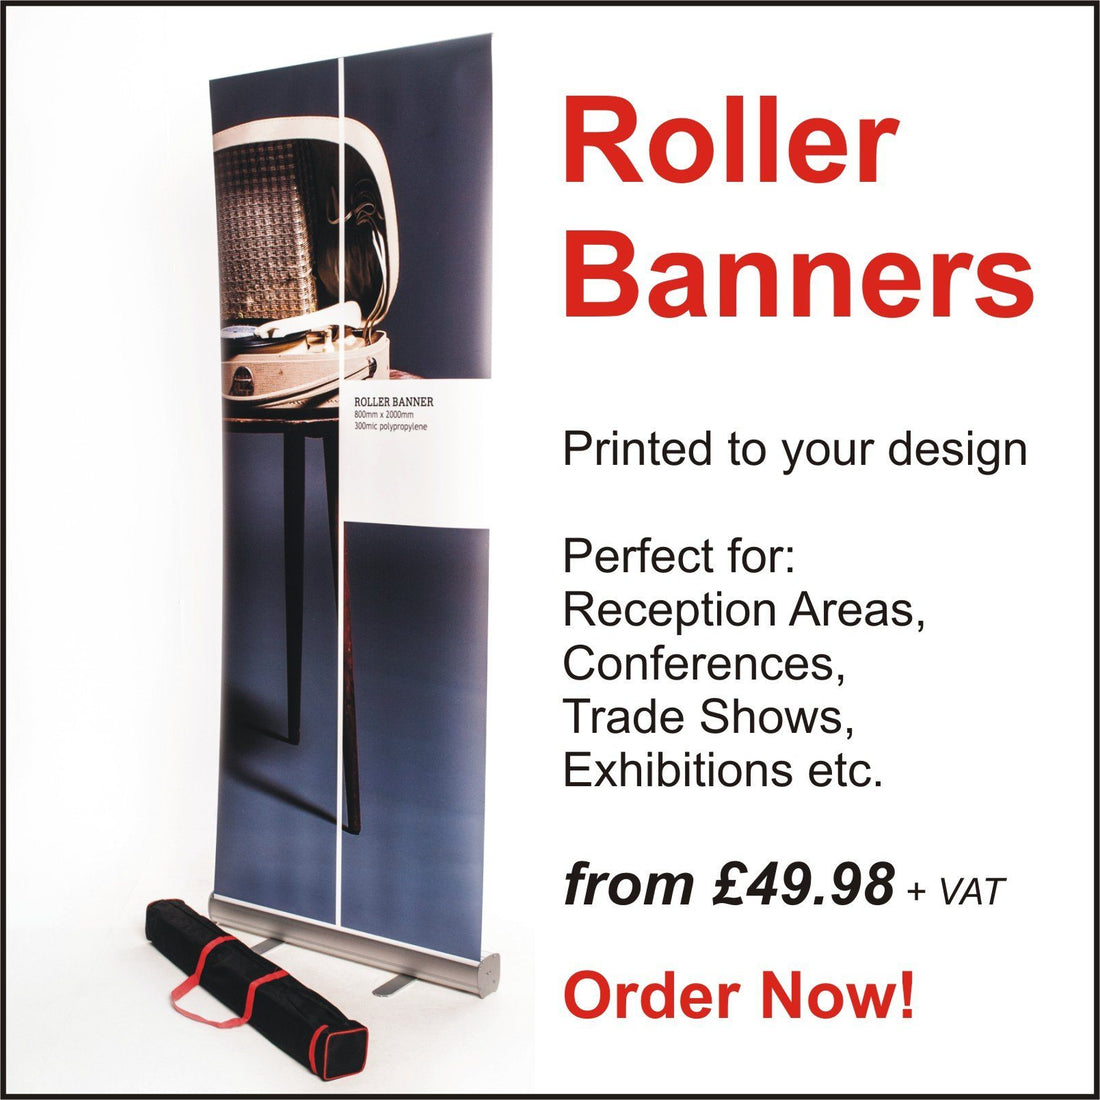 Newcastle Roller Banners Supplier.